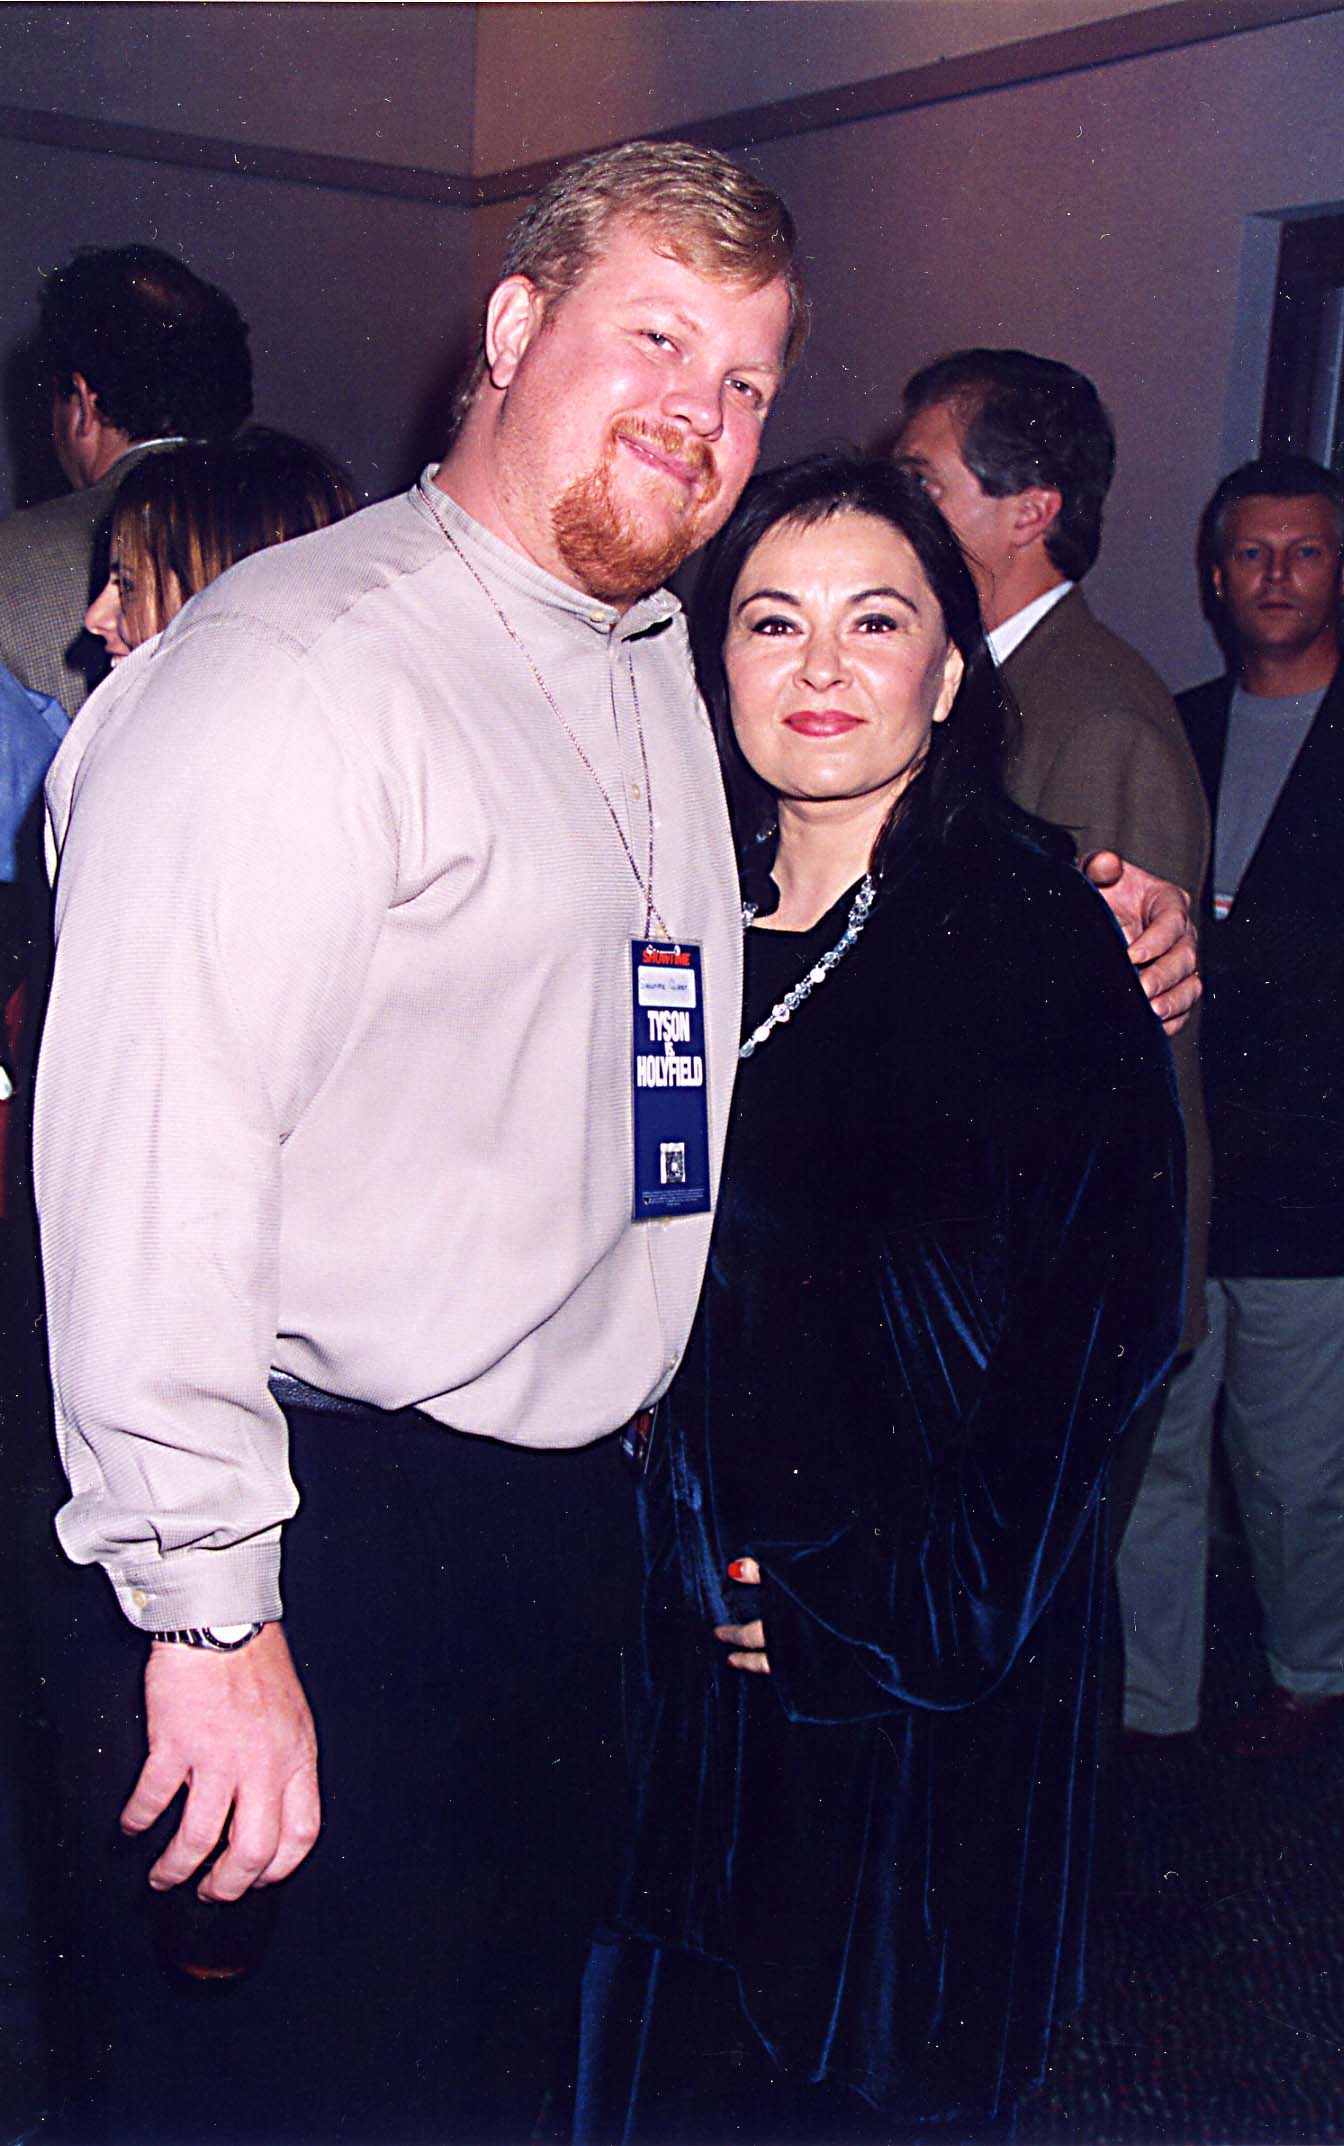 Ben Thomas and Roseanne Barr during a boxing match in Las Vegas, Nevada, on September 7, 1996. | Source: Jeff Kravitz/FilmMagic, Inc/Getty Images